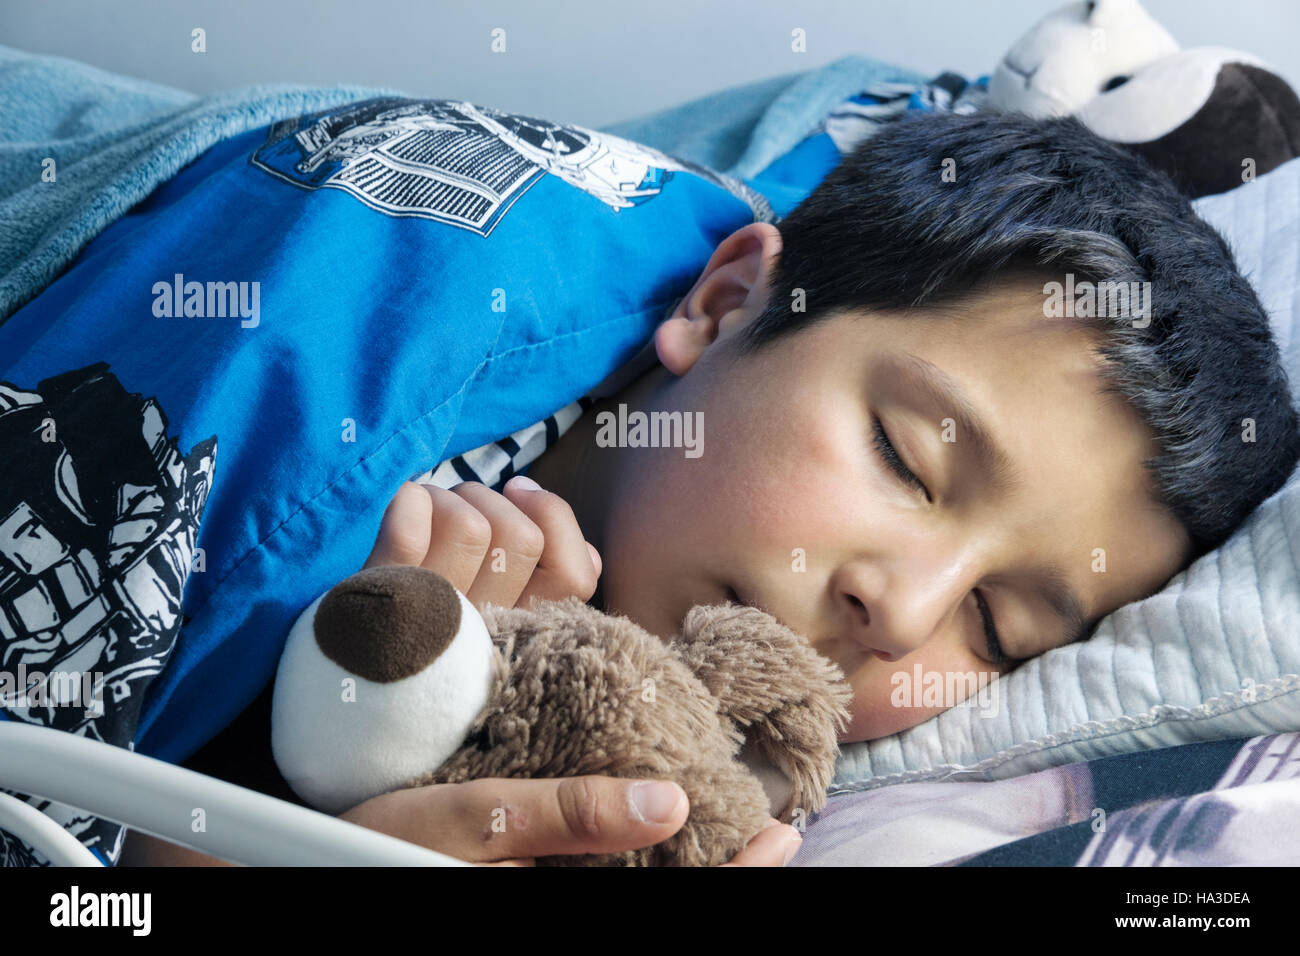 Sleeping child in bed with cuddly toy Stock Photo